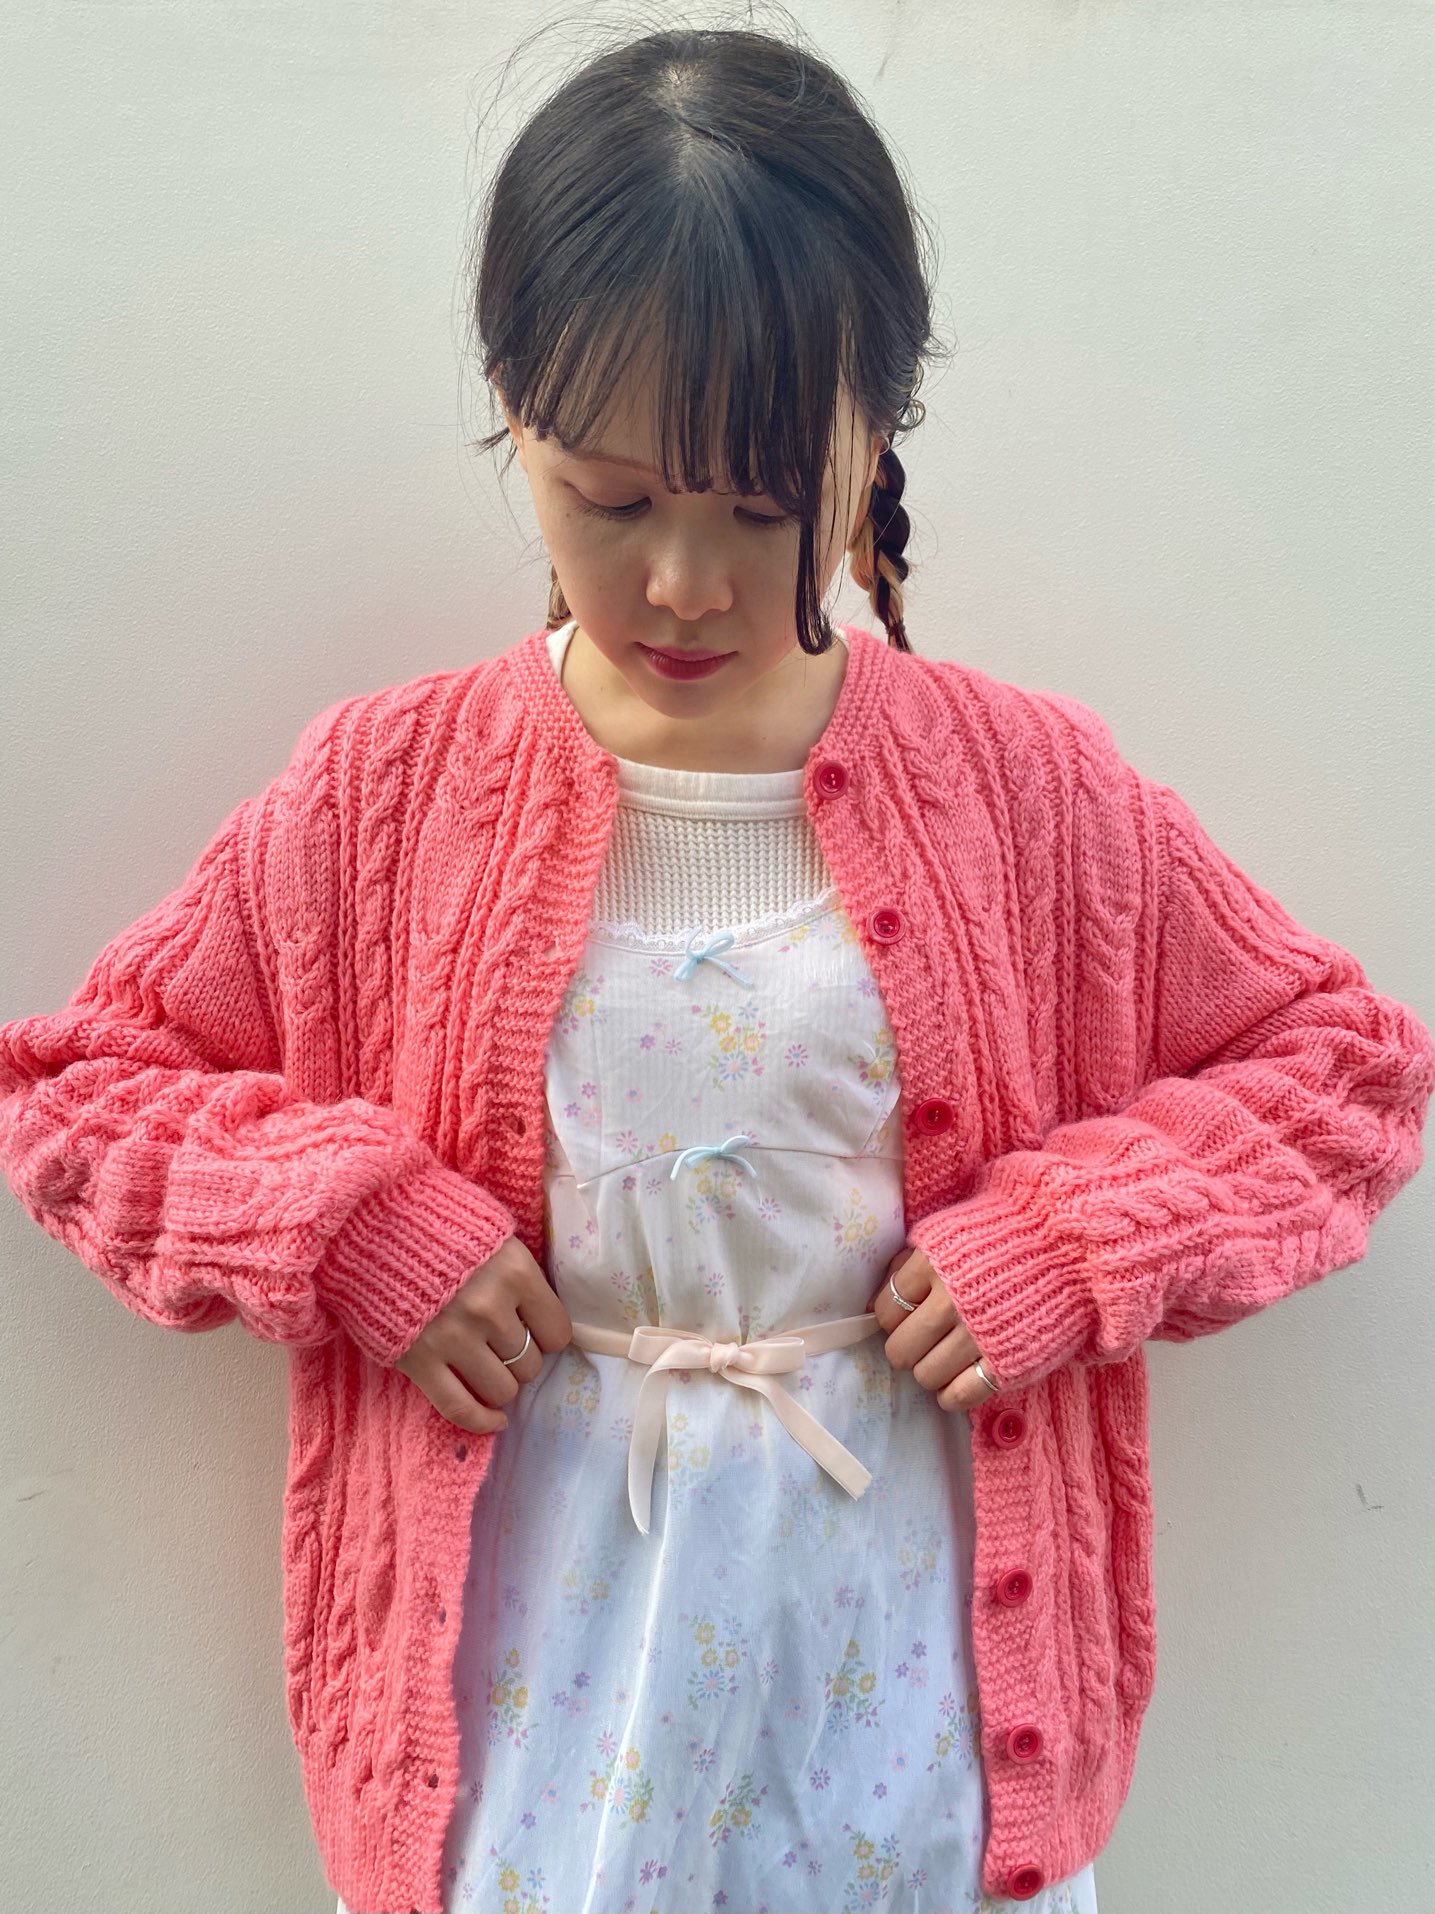 <img class='new_mark_img1' src='https://img.shop-pro.jp/img/new/icons20.gif' style='border:none;display:inline;margin:0px;padding:0px;width:auto;' />《SALE》candy pink knit cardigan